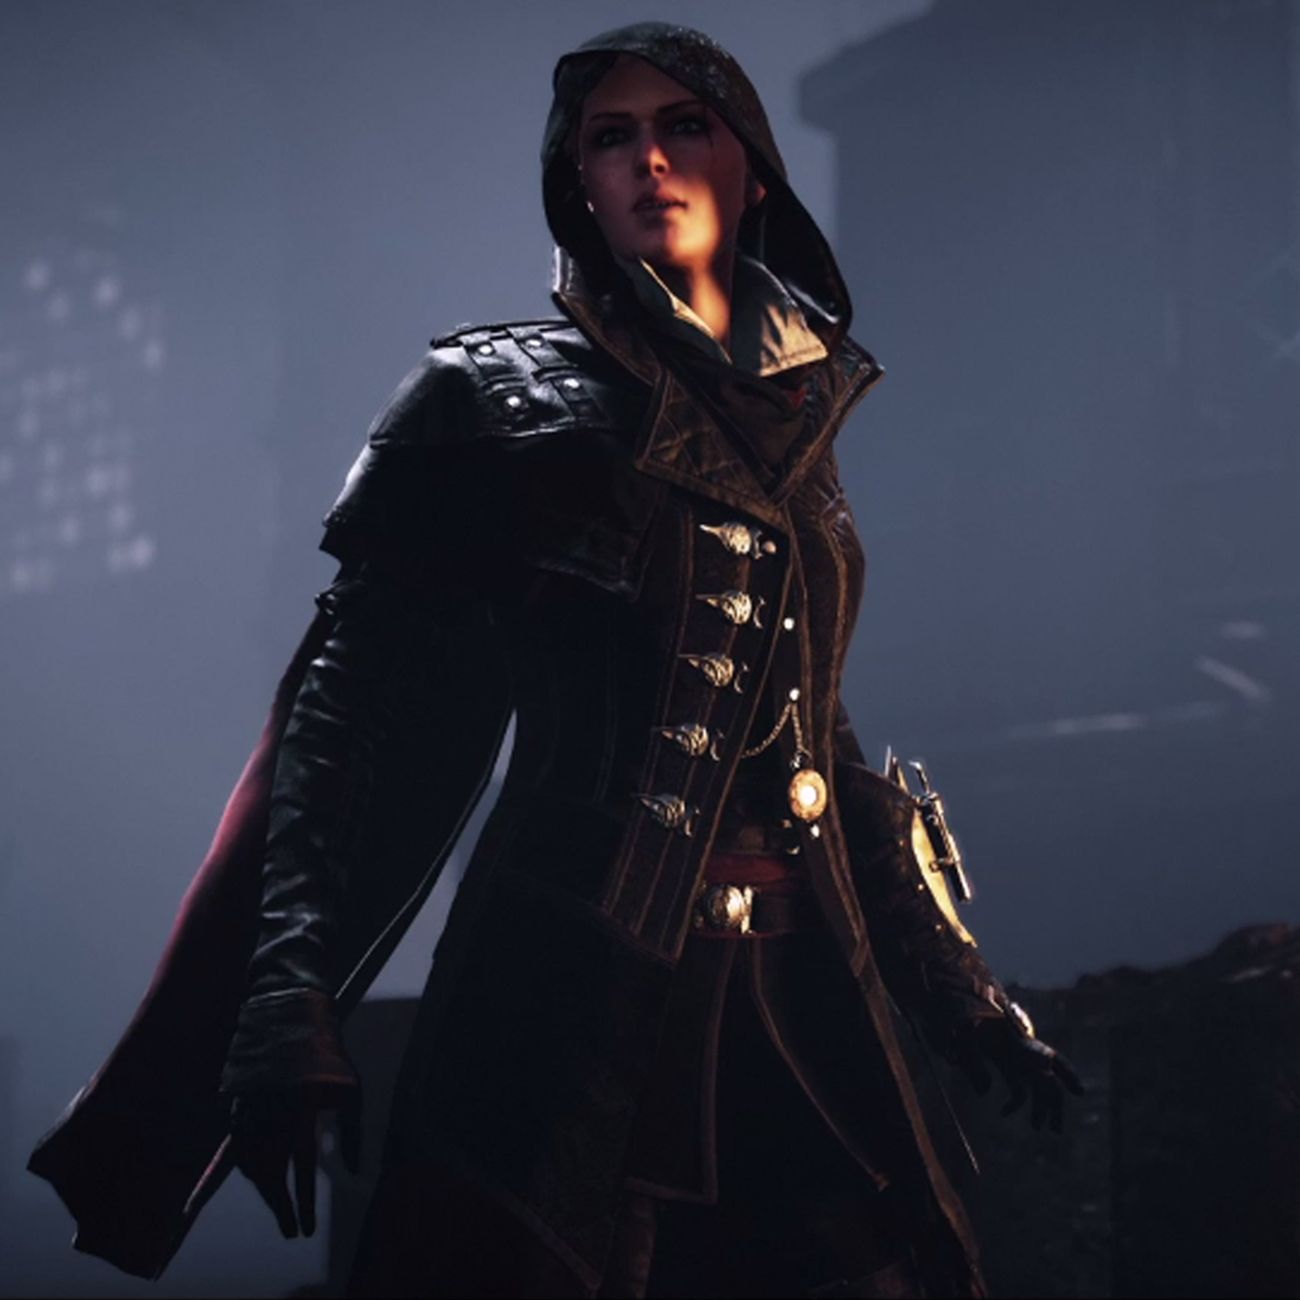 Assassin's Creed Franchise. Assassins creed syndicate evie